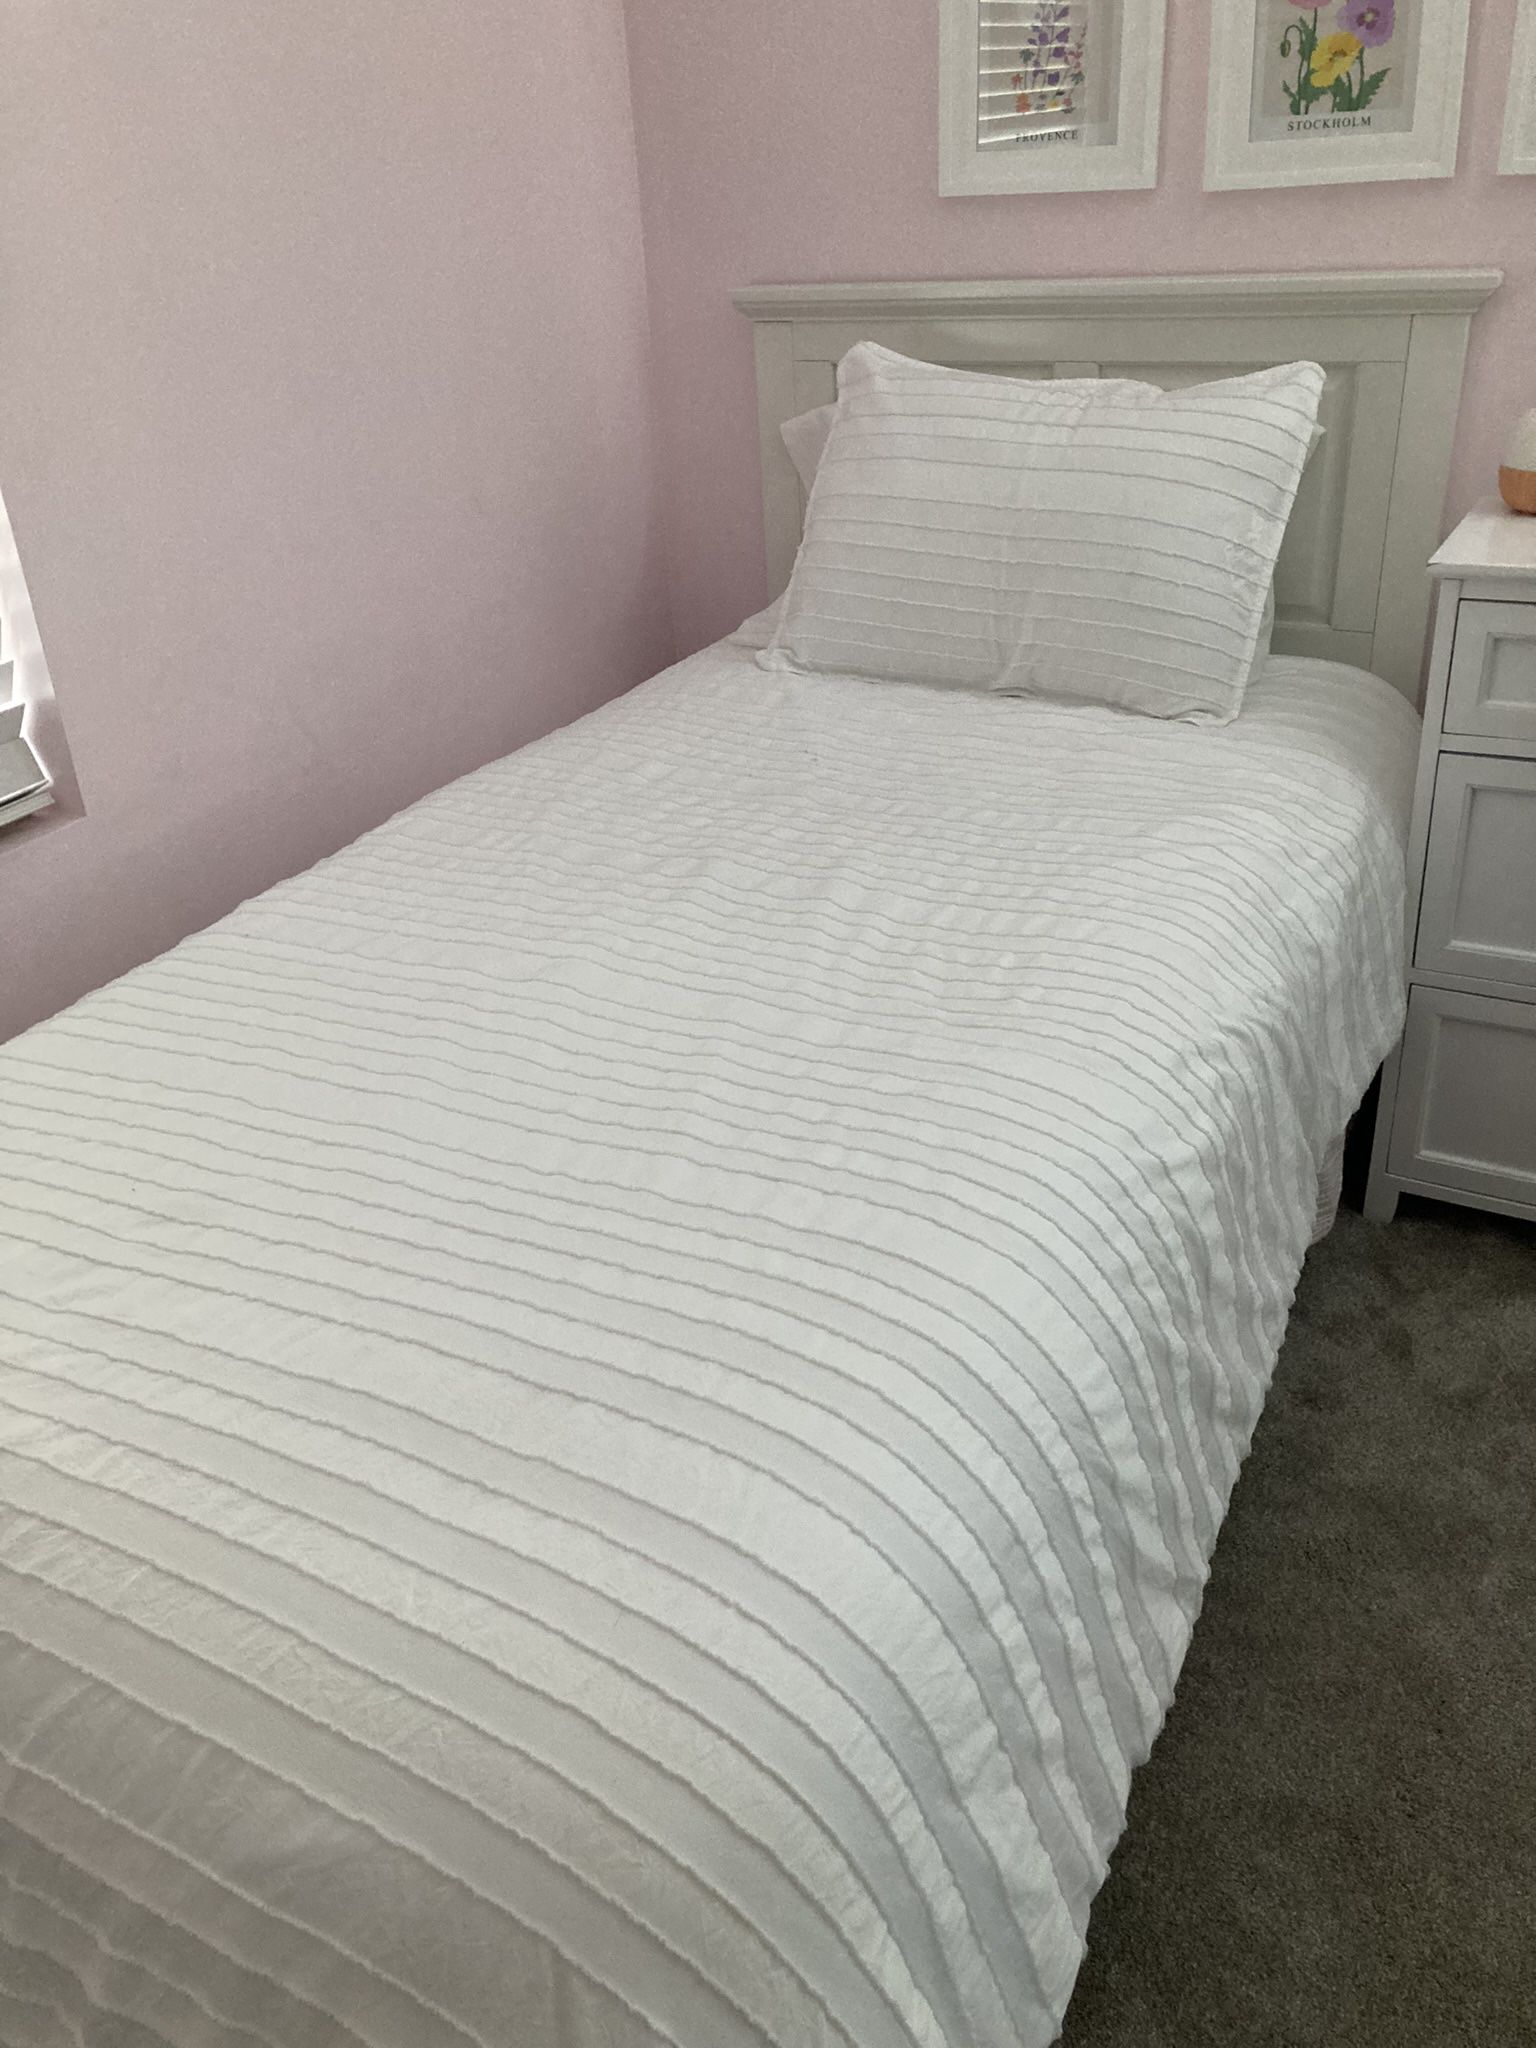 Twin Mattress With Headboard And Bed frame 